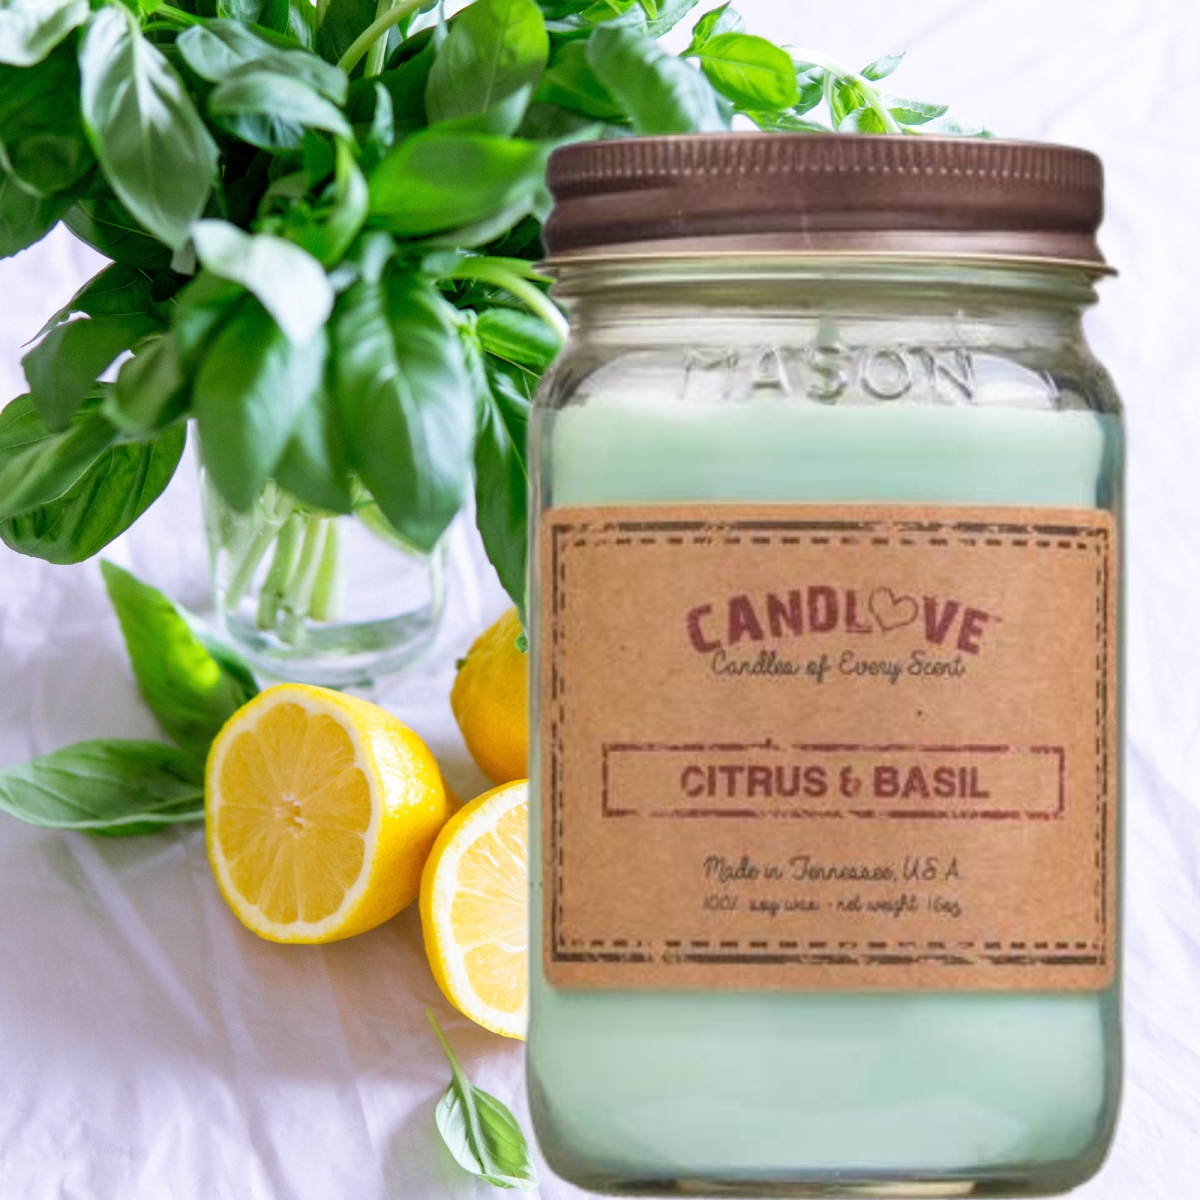 Picture of PPI SUPPLIES Citrus-B-C Candlove Citrus Basil Scented Candle - Non-Toxic 100% Soy Candle - Handmade & Hand Poured Long Burning Candle - Highly Scented All Natural Clean Burning Candle (16 OZ Mason Jar) Made in The USA